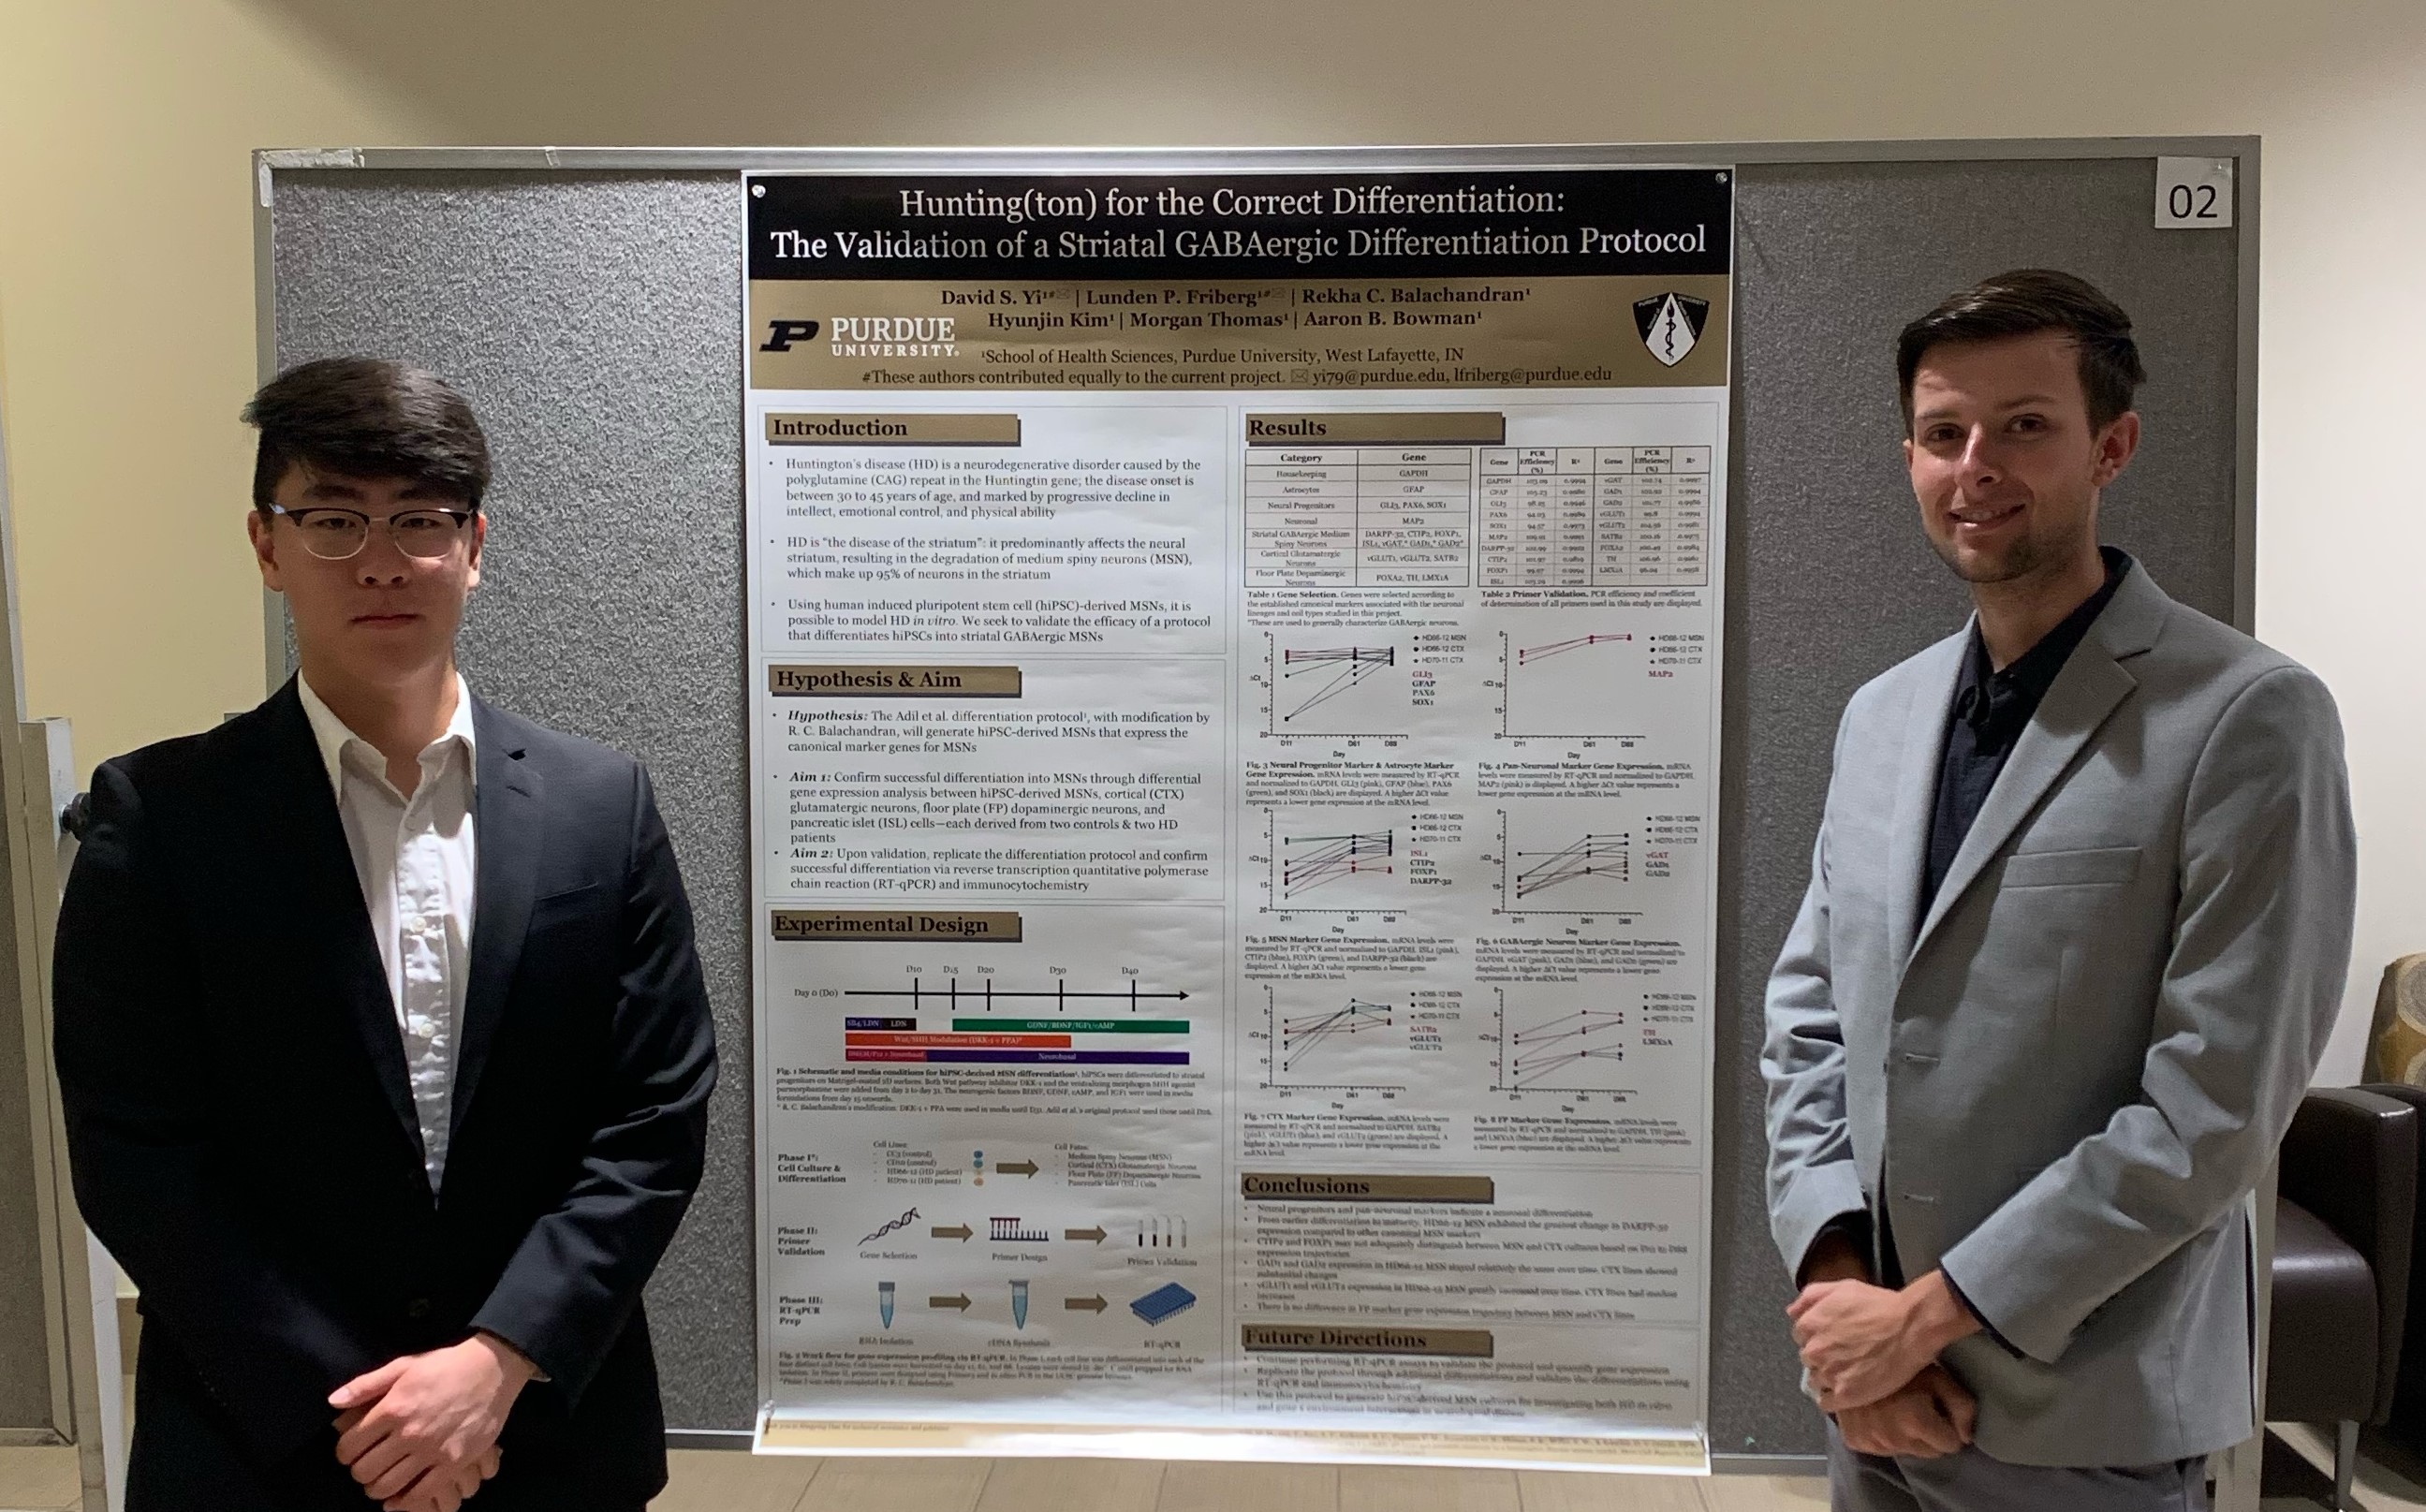 Photo of David Yi and Lunden Frieberg with the poster they presented.